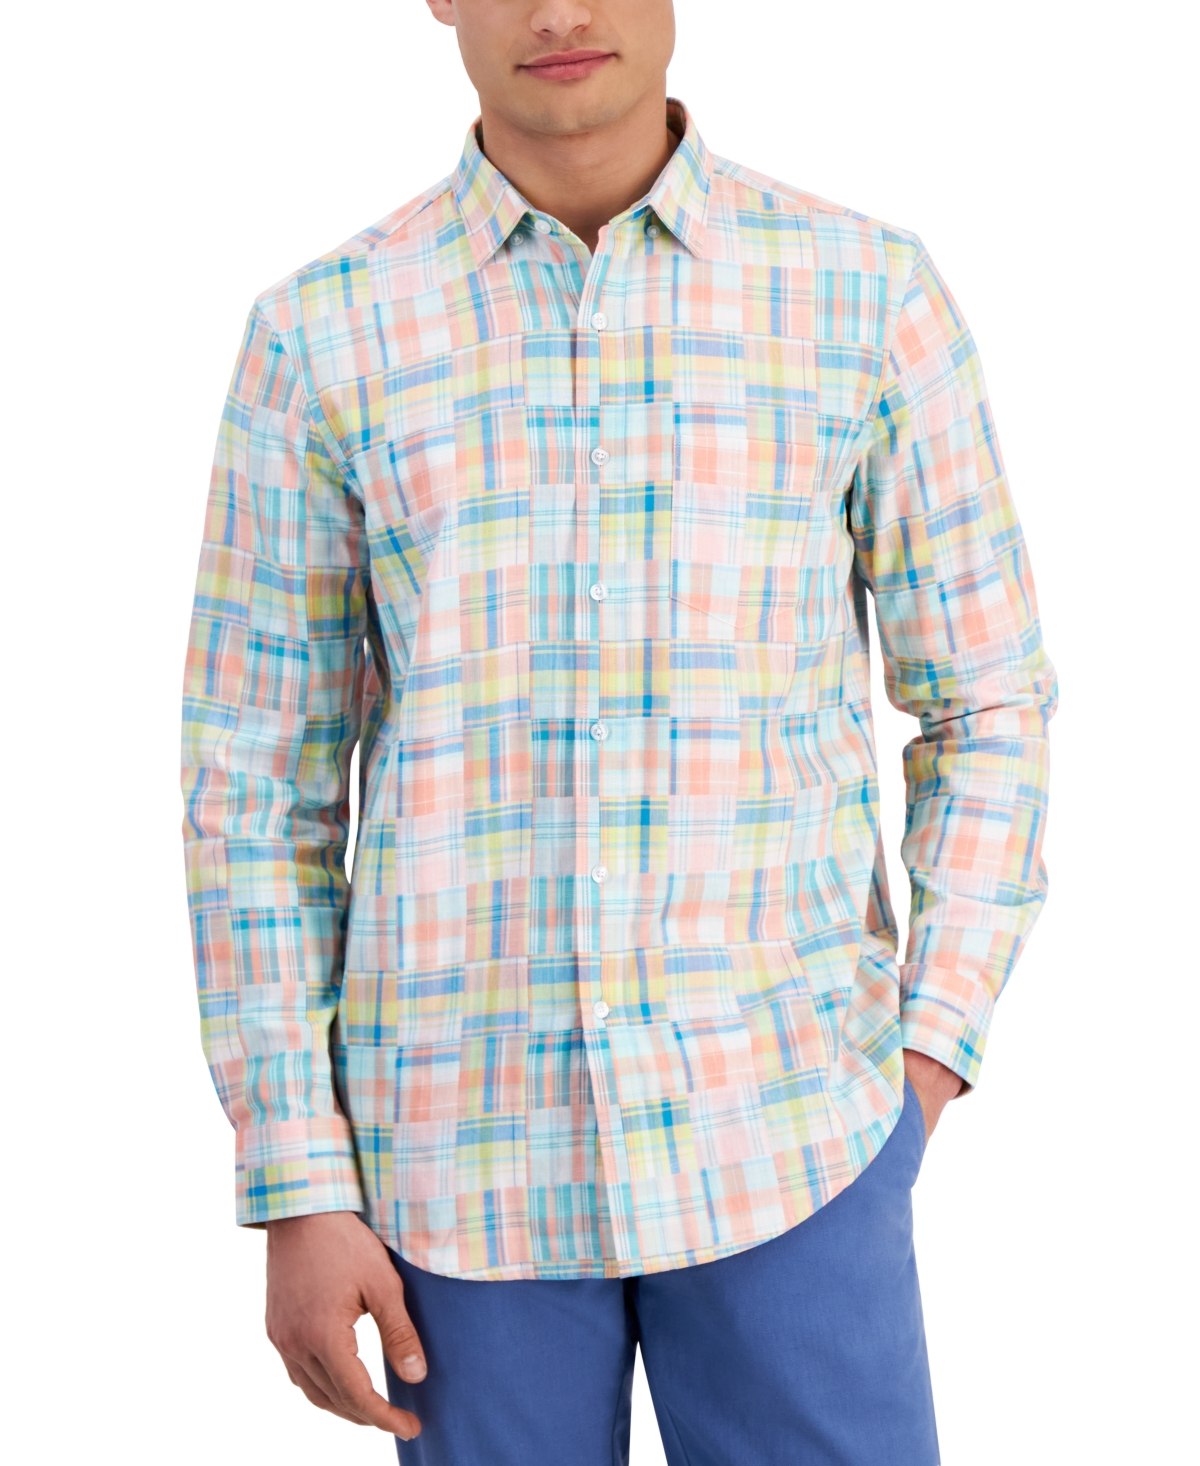 Men's Madras Plaid Long Sleeve Button-Front Shirt, Created for Macy's - Multi